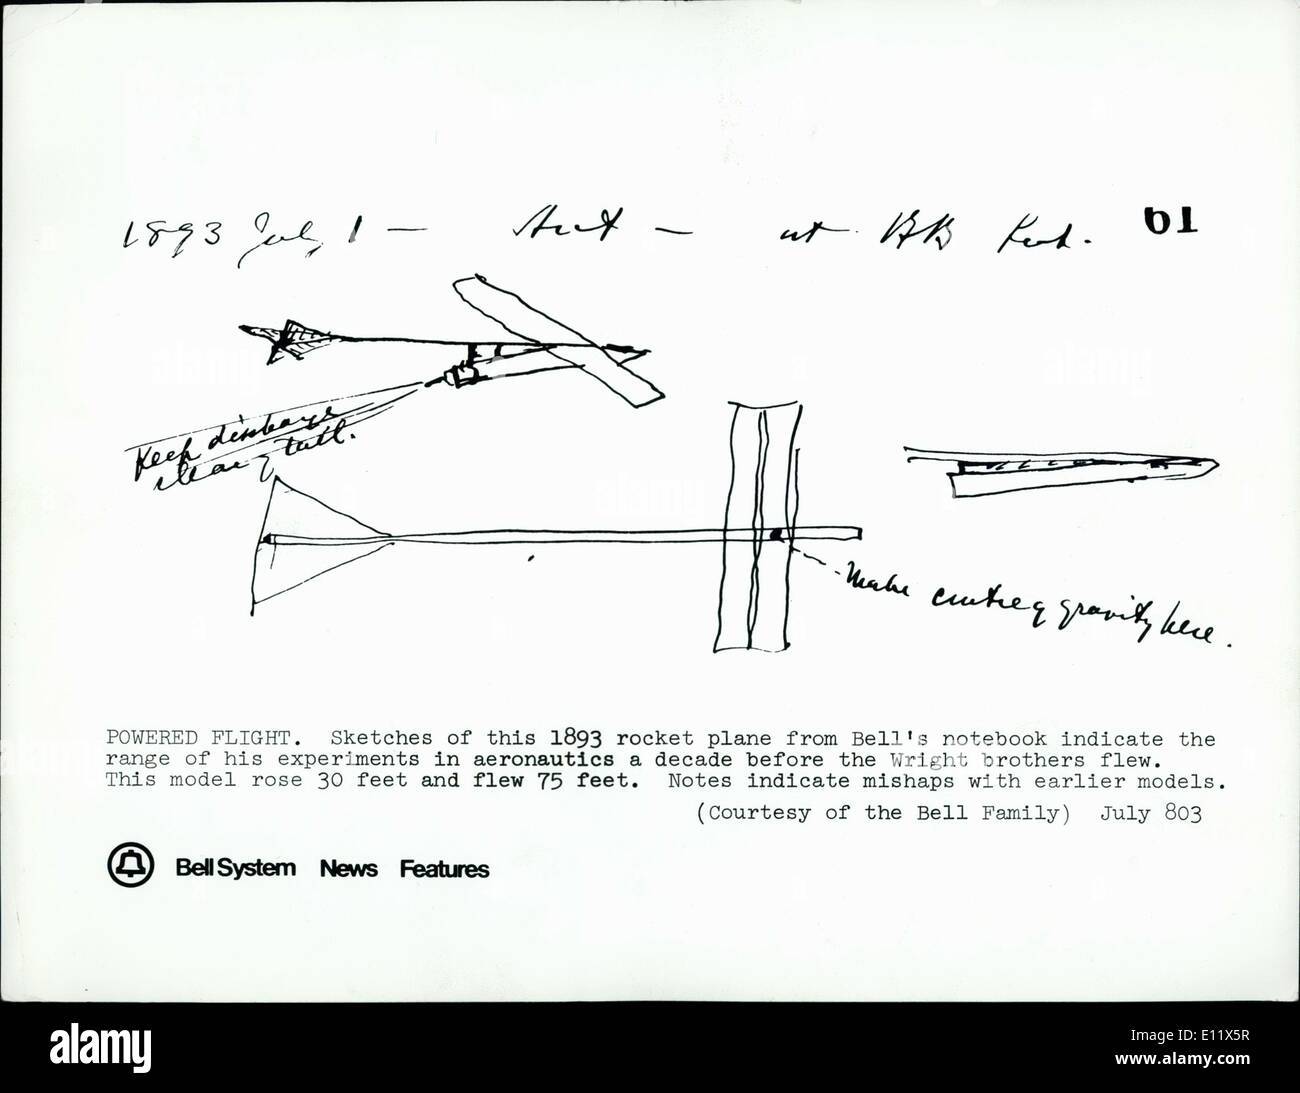 Jul. 07, 1980 - Powered Flight. Sketches of this 1893 Rockets Plane from Bell's Notebook indicate the range of his experiments in Aeronautics a decade before the Wright Brothers Flew. this model rose 30 feet and flew 75 feet. Notes indicate mishaps with earlier models. Stock Photo